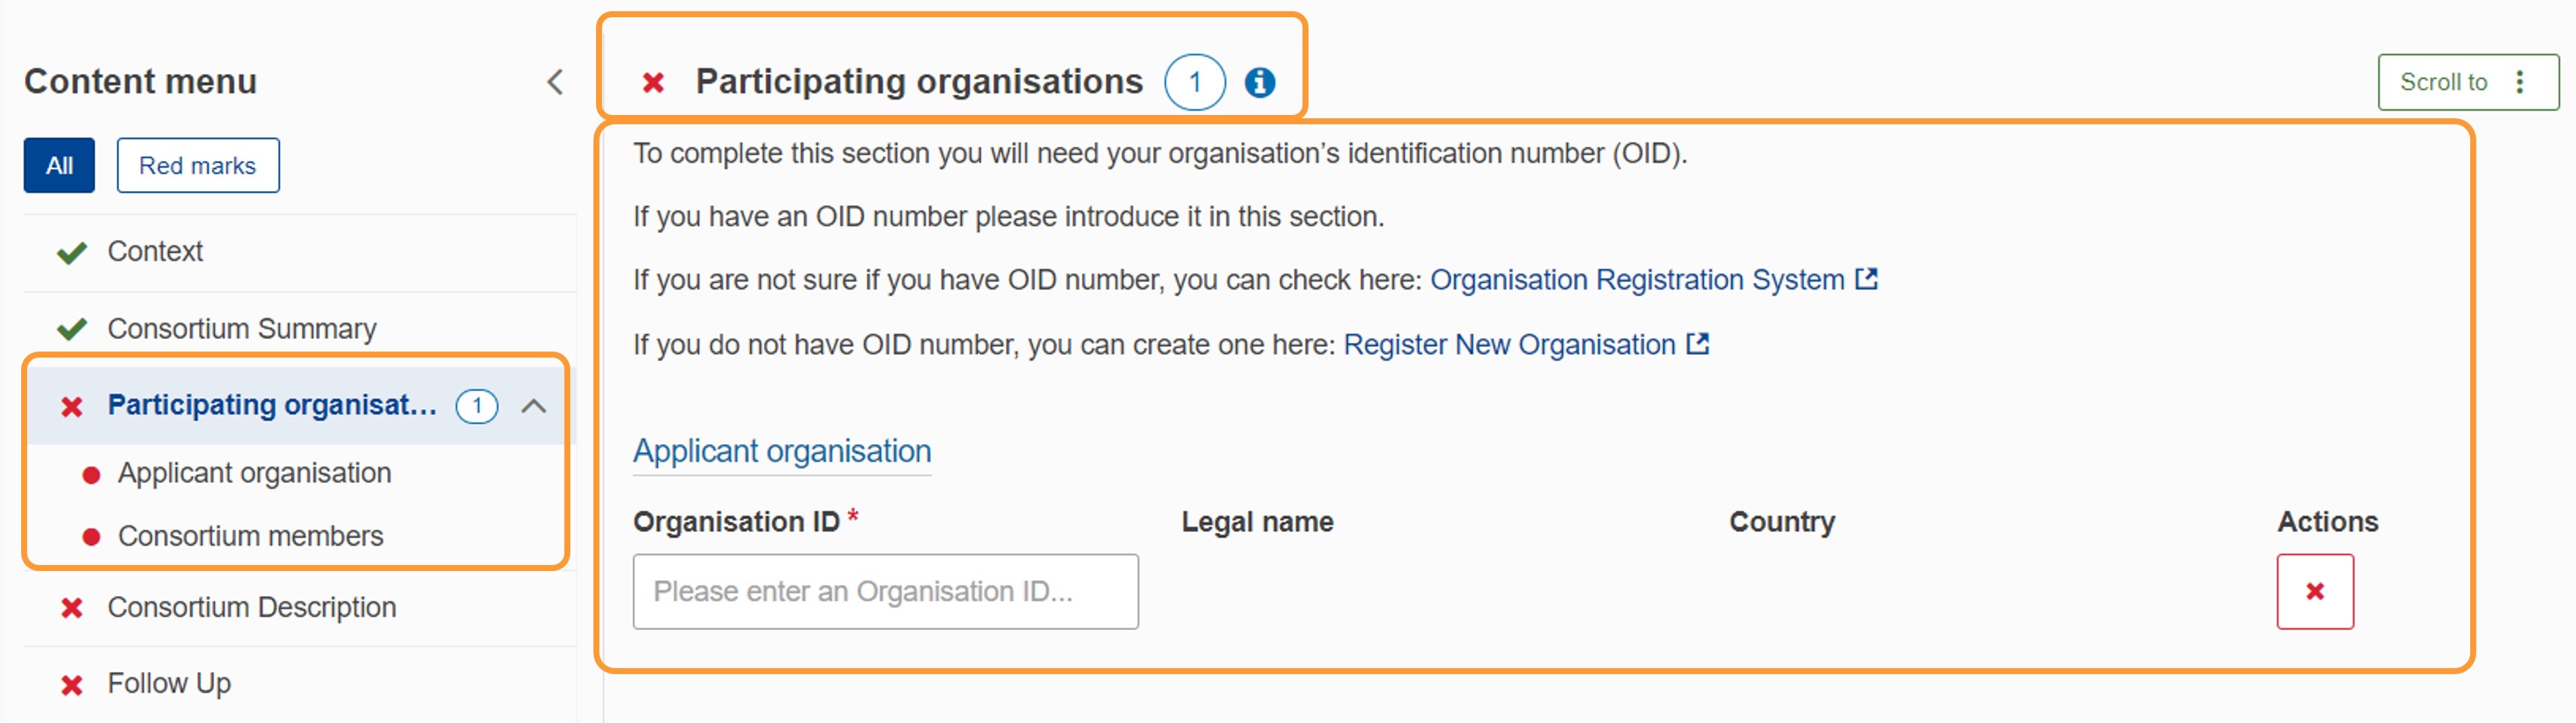 Participating organisations screen - Example from KA130-HED